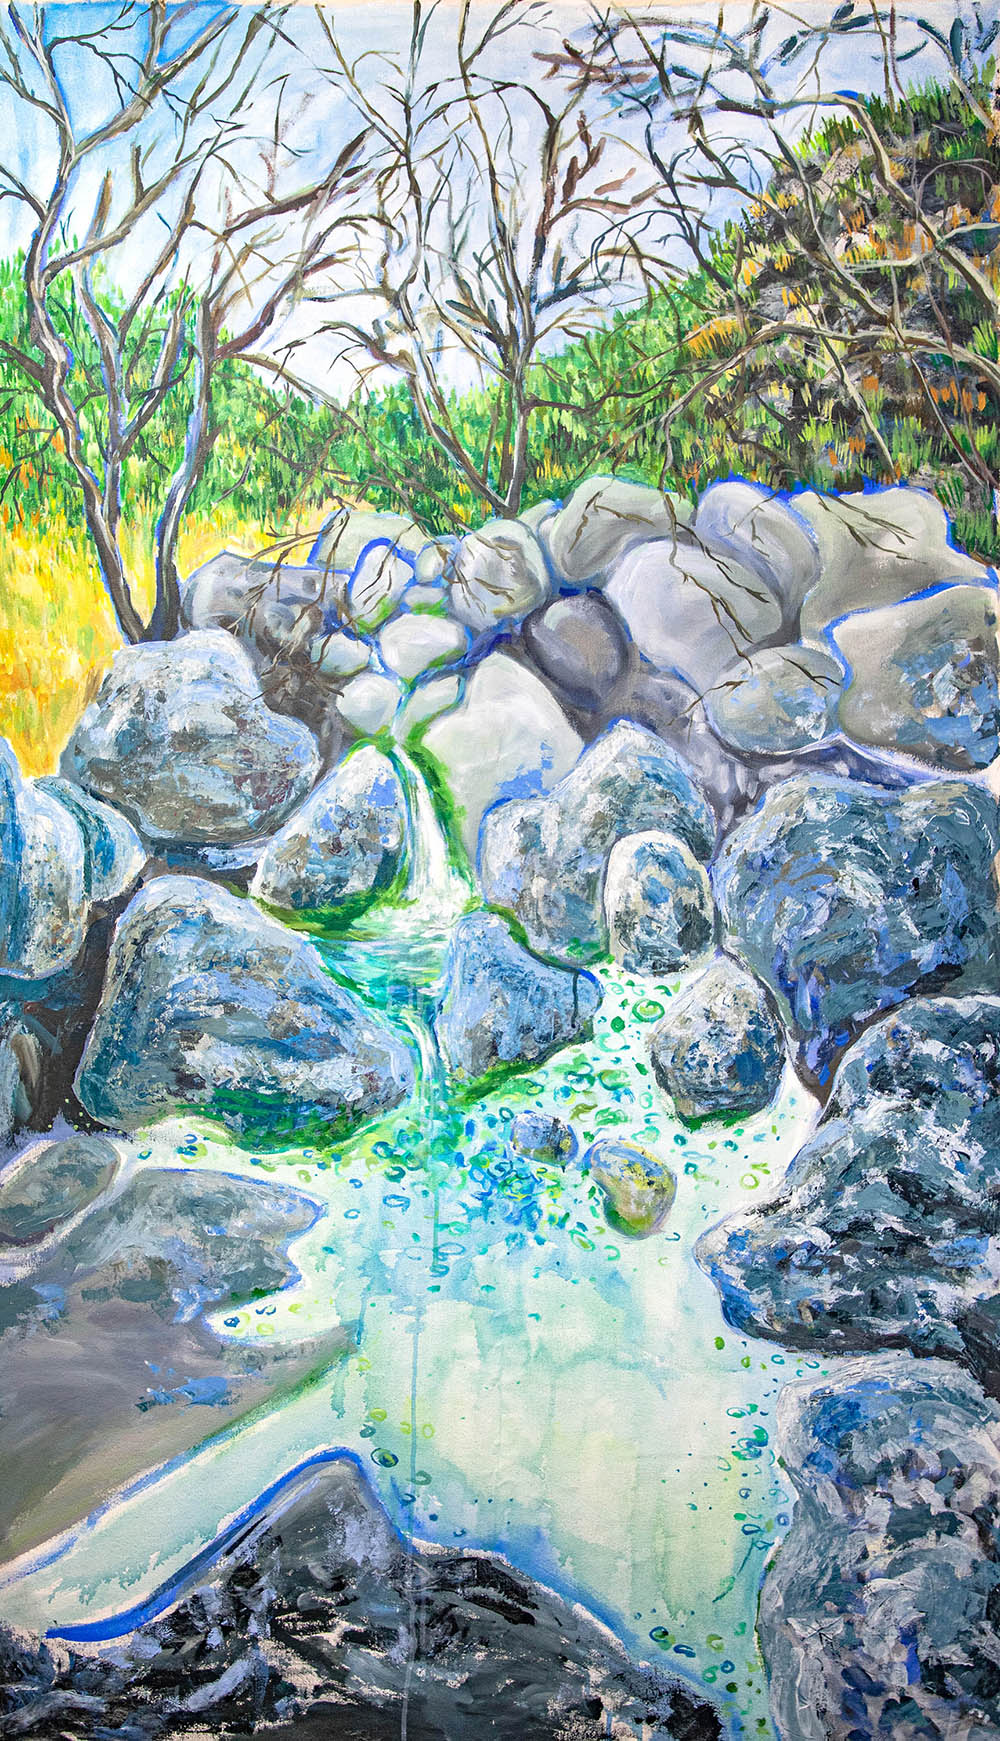 painting of water flowing through rocks with trees in the background